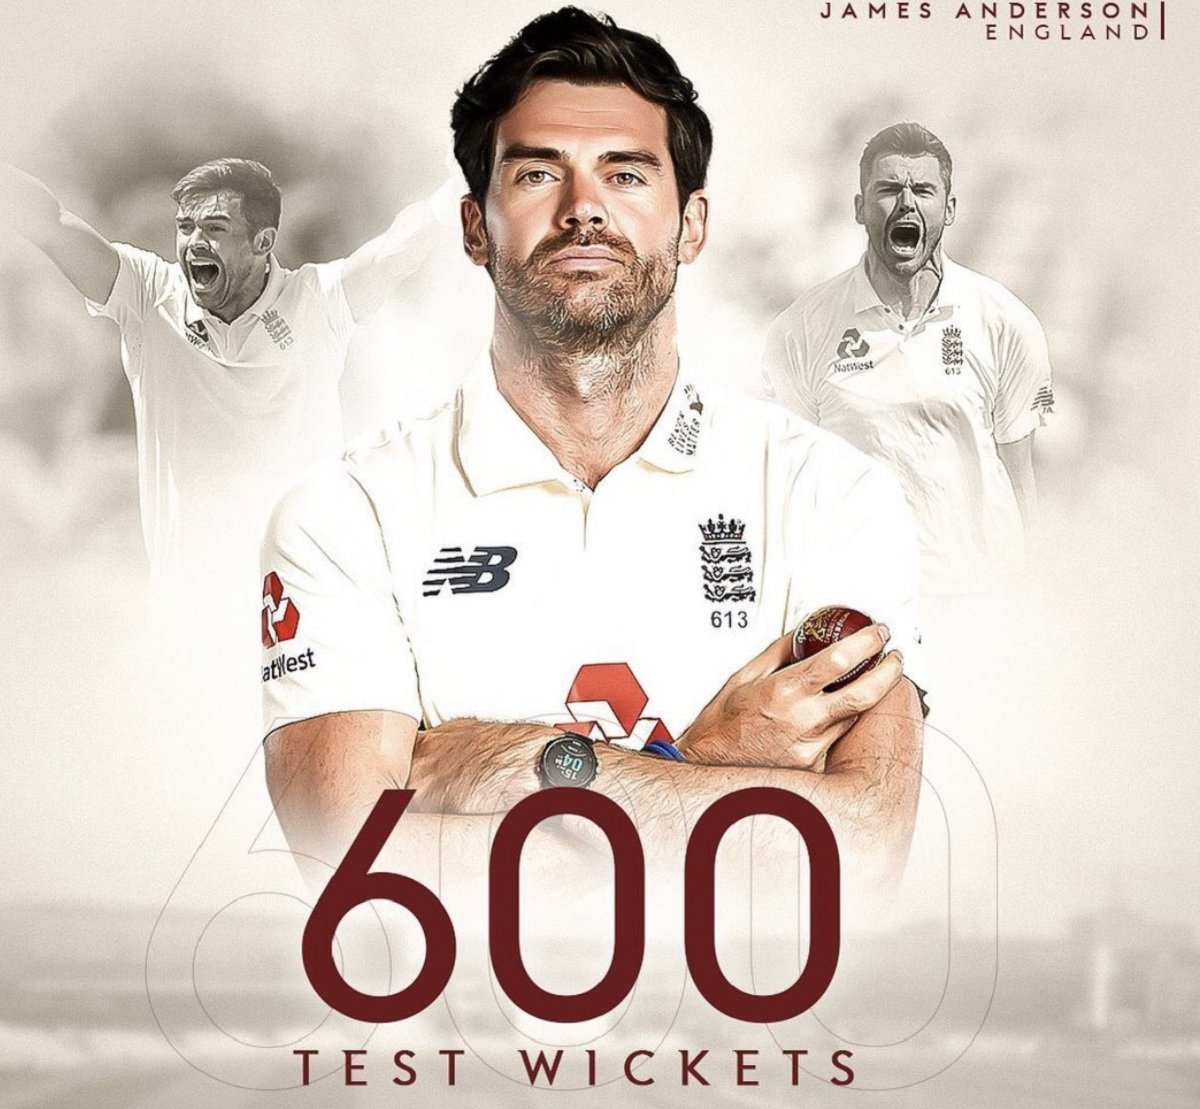 Jimmy Anderson becomes first fast bowler to reach 600 wickets in Test Cricket 